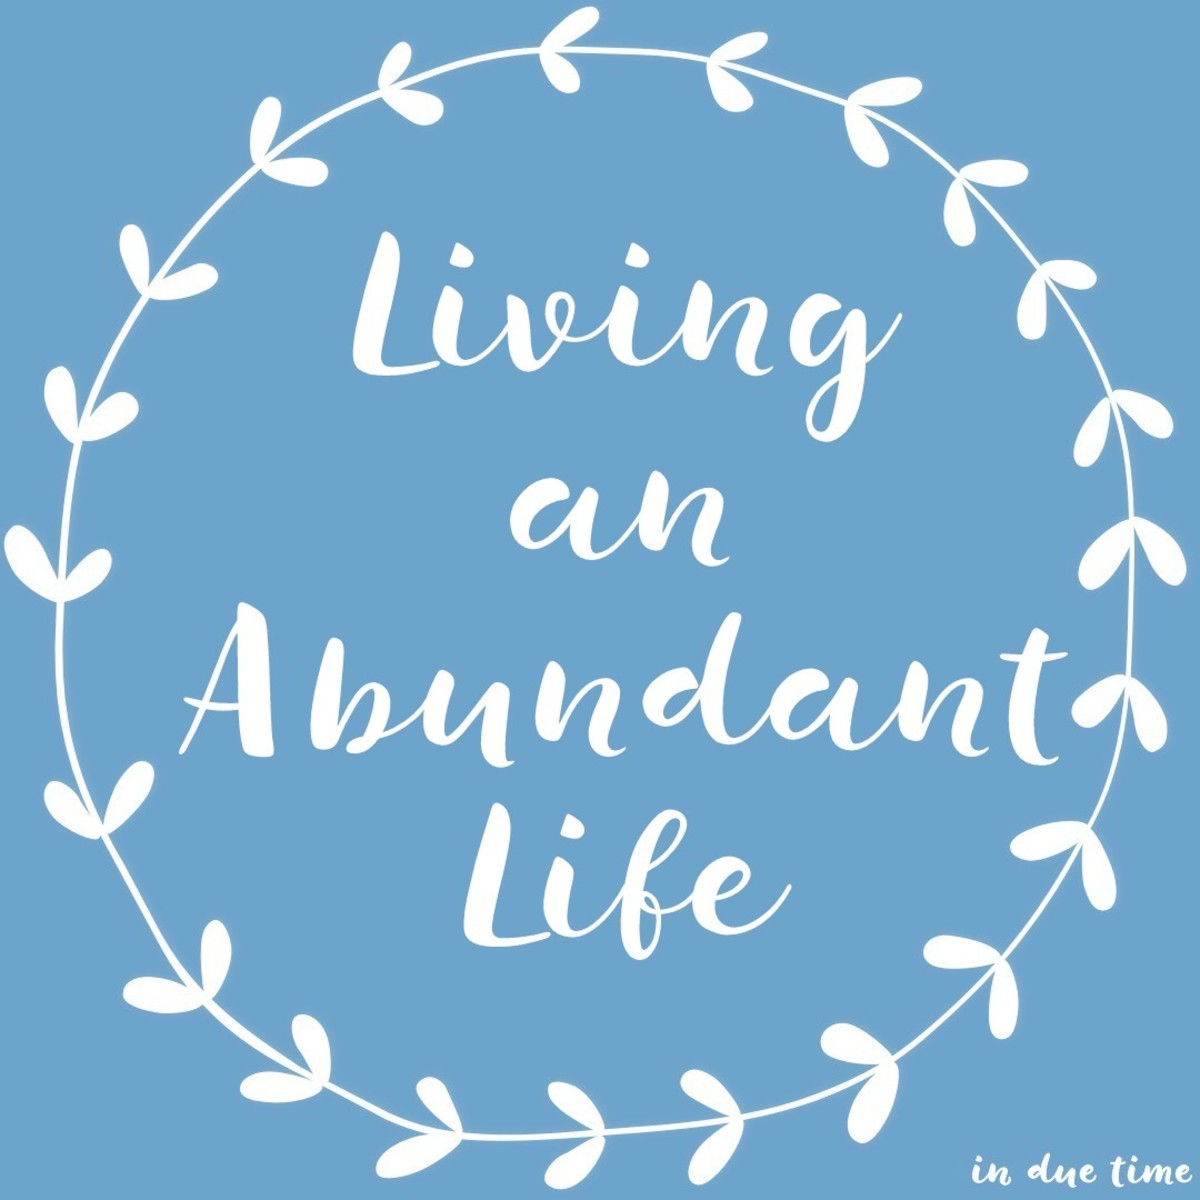 Wealthy Beyond Your Wildest Dreams: 3 Simple Steps to Living an Abundant Life